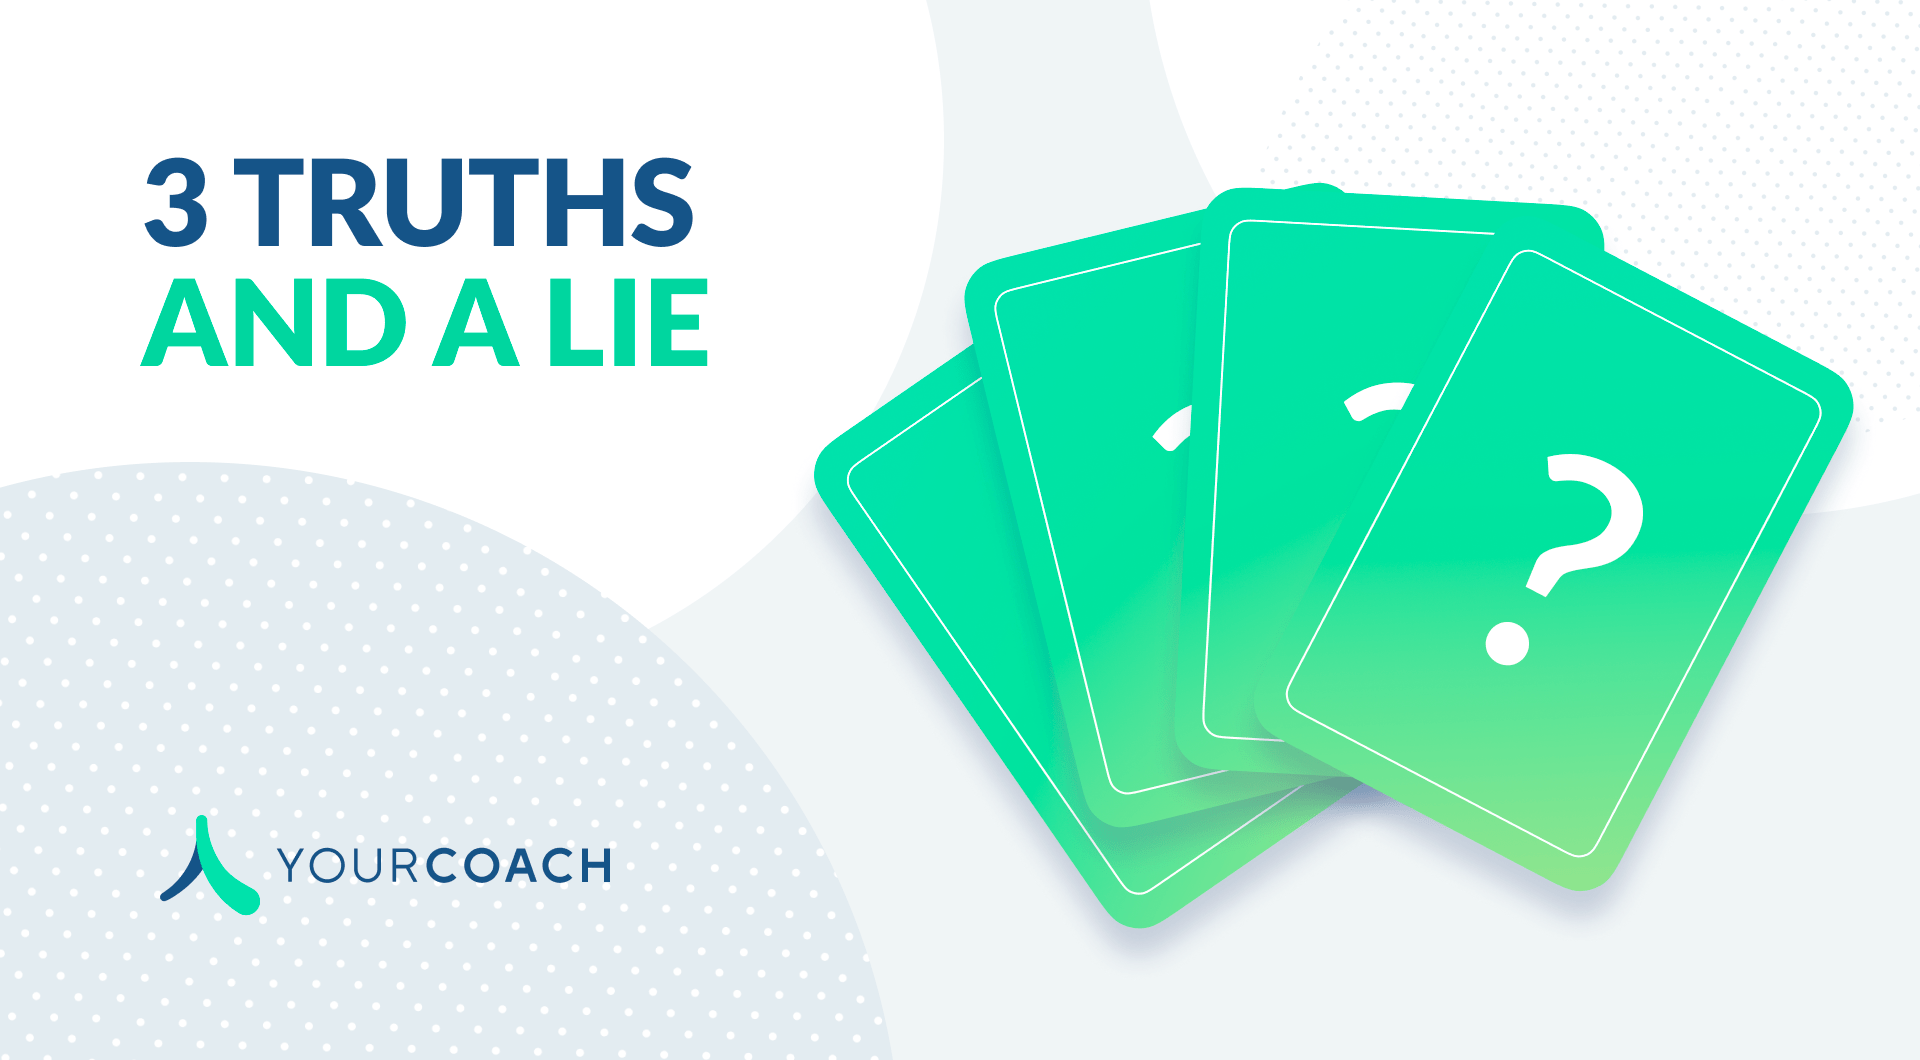 Get to Know YourCoach – Three Truths and a Lie